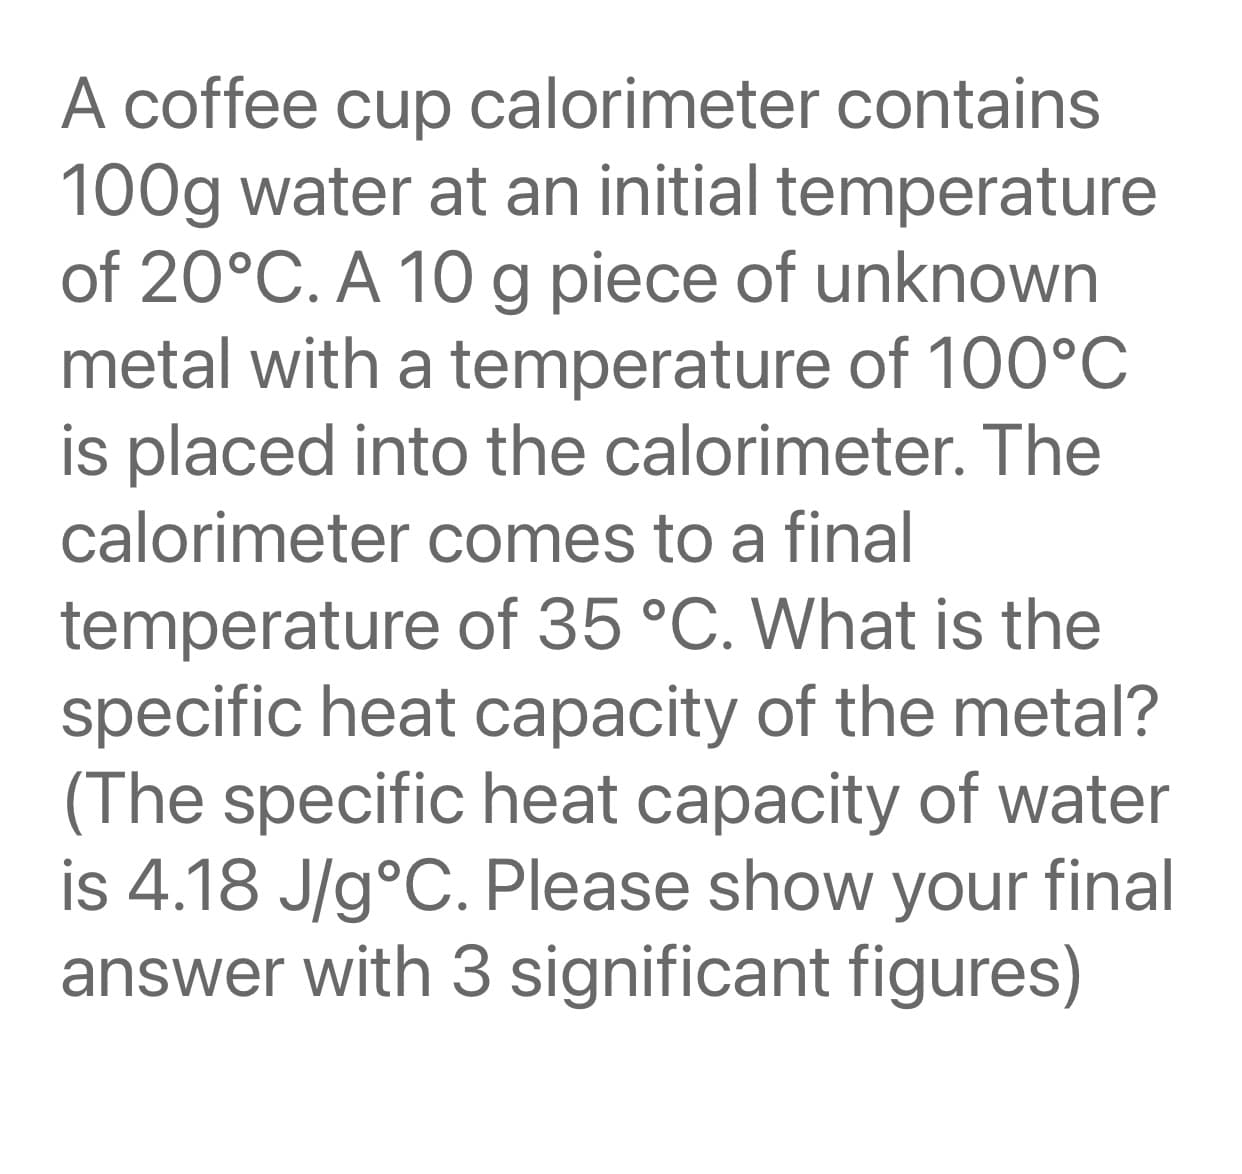 A coffee cup calorimeter contains
100g water at an initial temperature
of 20°C. A 10g piece of unknown
metal with a temperature of 100°C
is placed into the calorimeter. The
calorimeter comes to a final
temperature of 35 °C. What is the
specific heat capacity of the metal?
(The specific heat capacity of water
is 4.18 J/g°C. Please show your final
answer with 3 significant figures)
